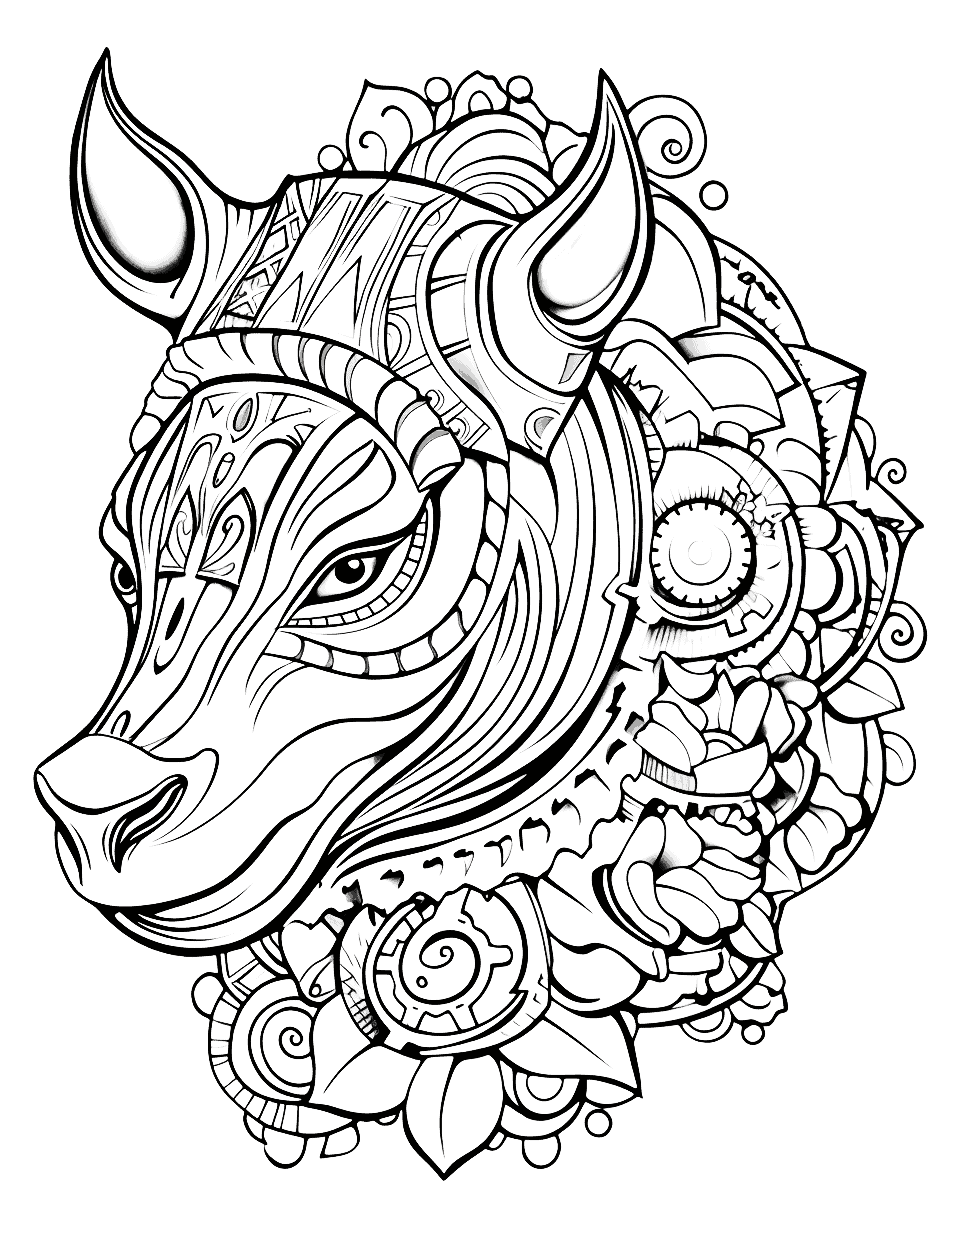 Steampunk Animal Adult Coloring Page - A steampunk-style depiction of an animal made out of mechanical parts and gears.